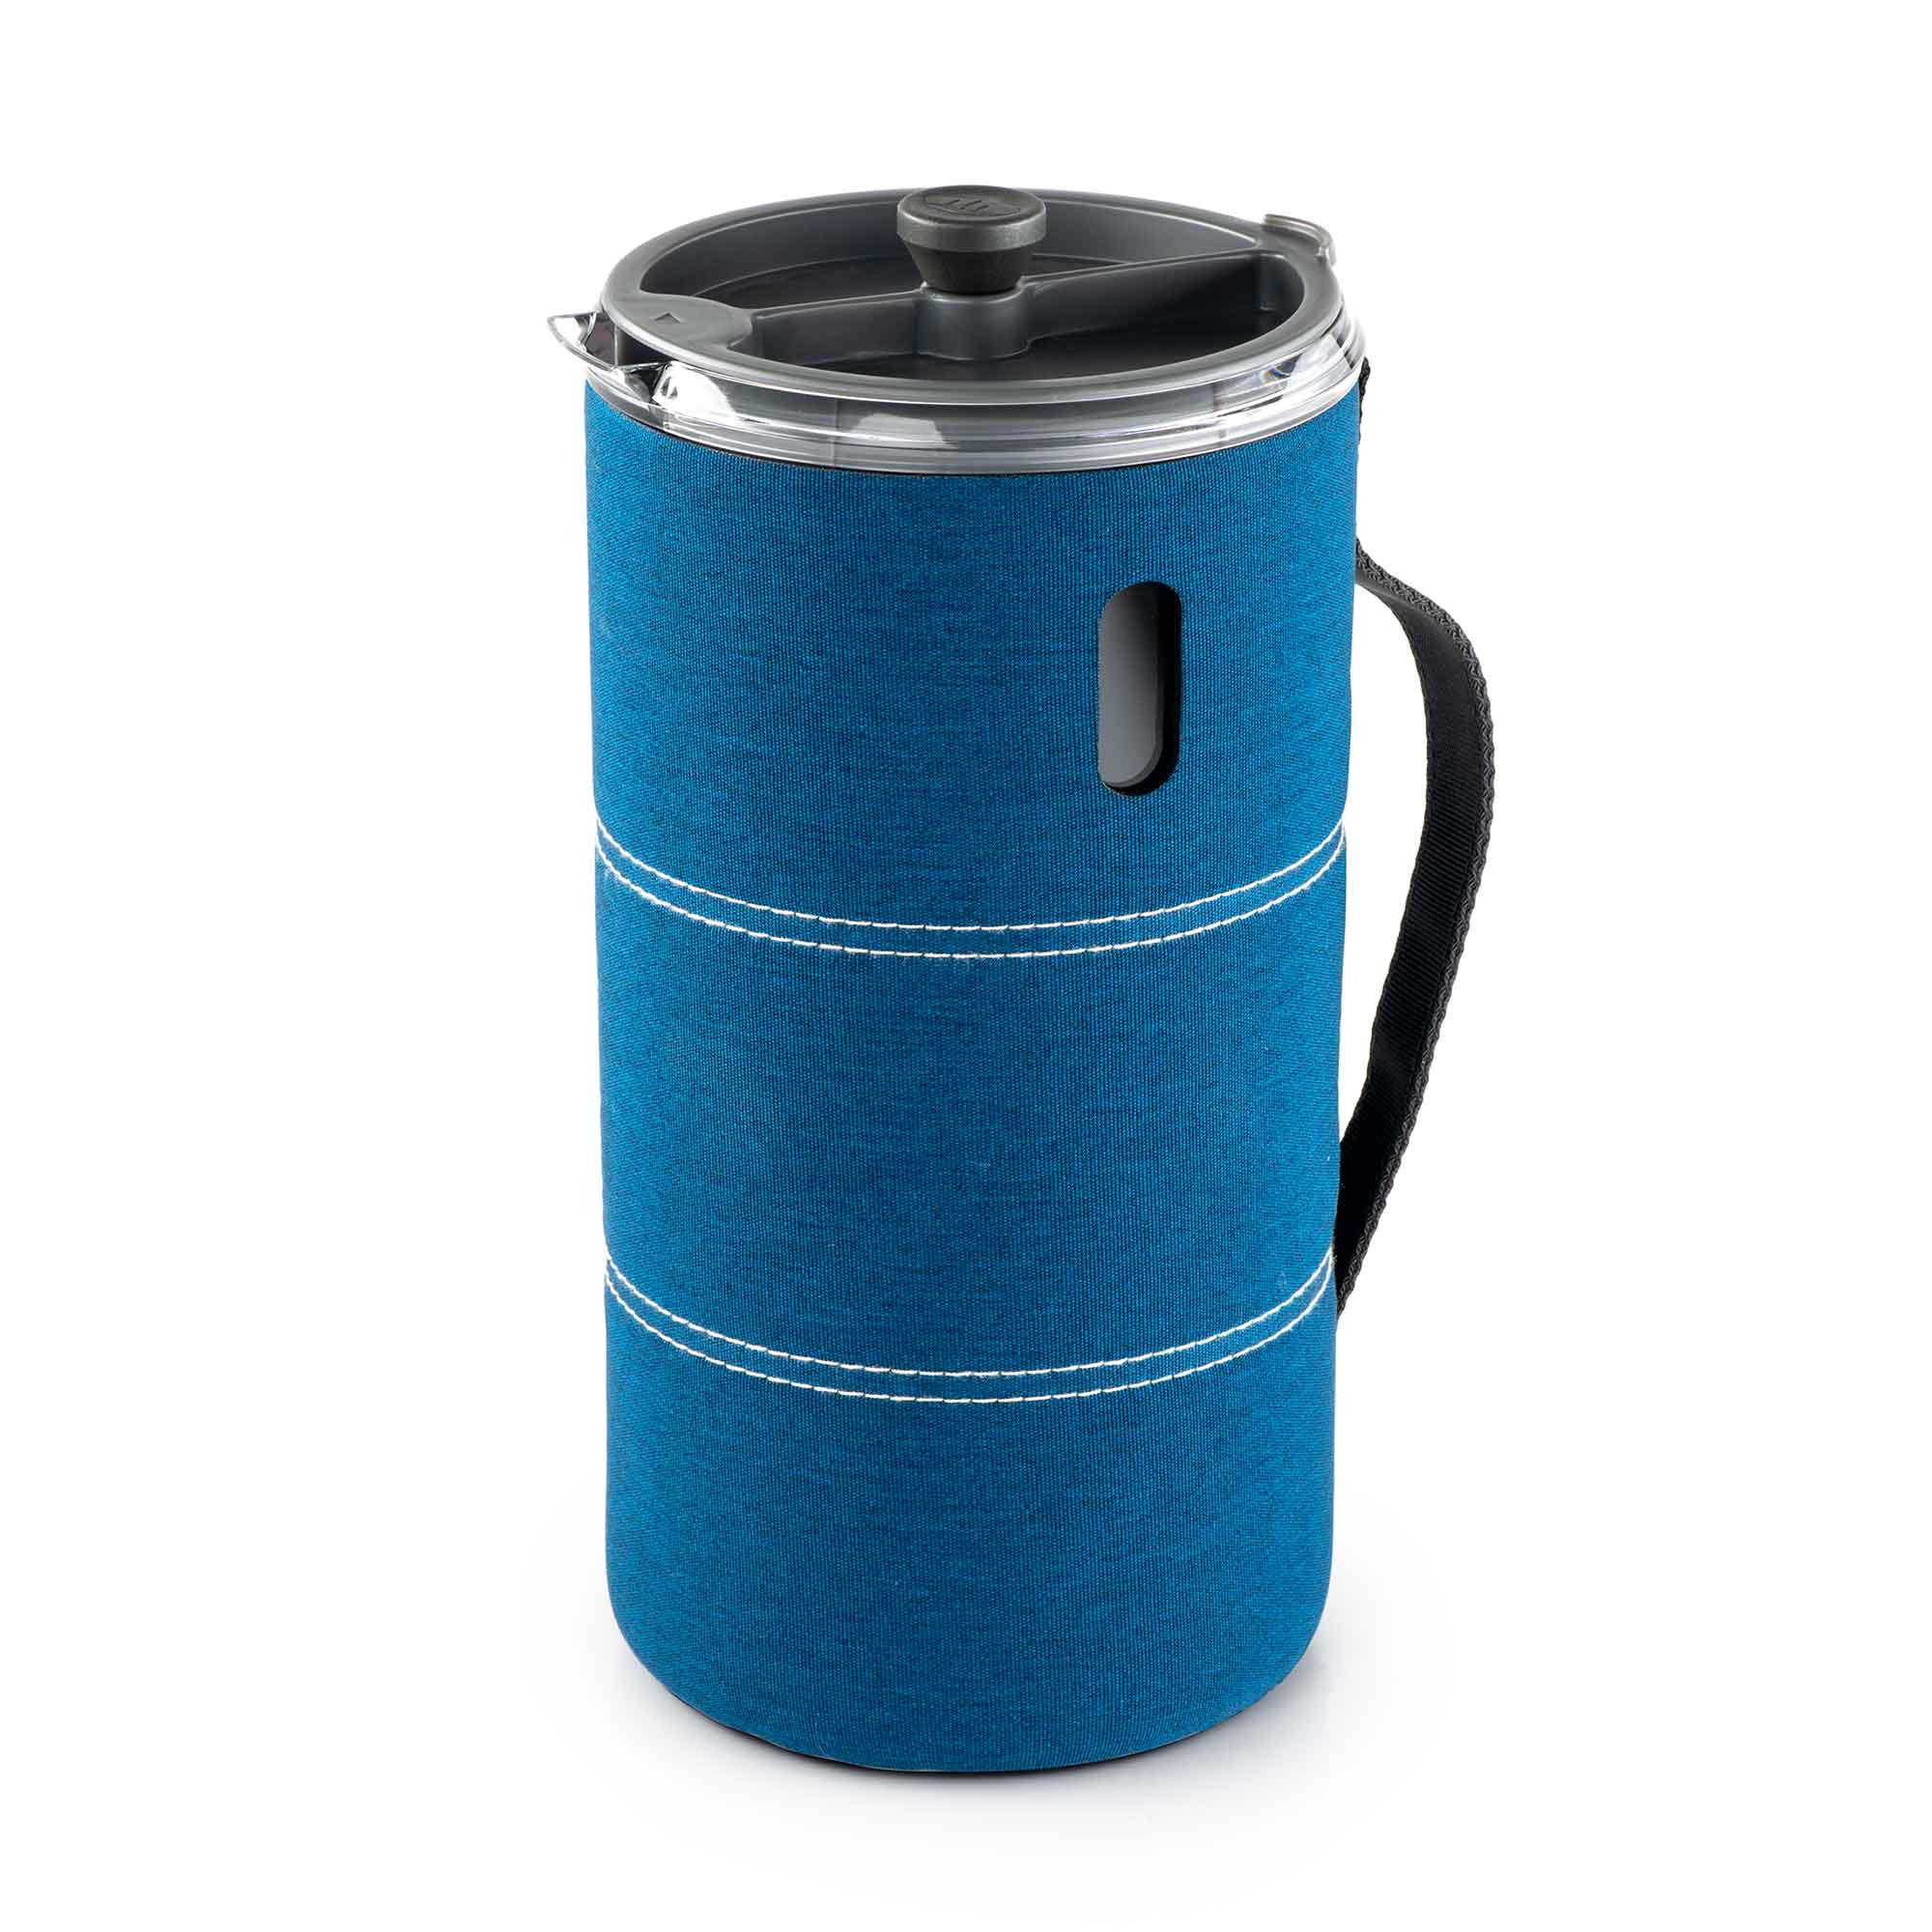 Best Travel Mug For Hot Coffee ⋆ The Java Press